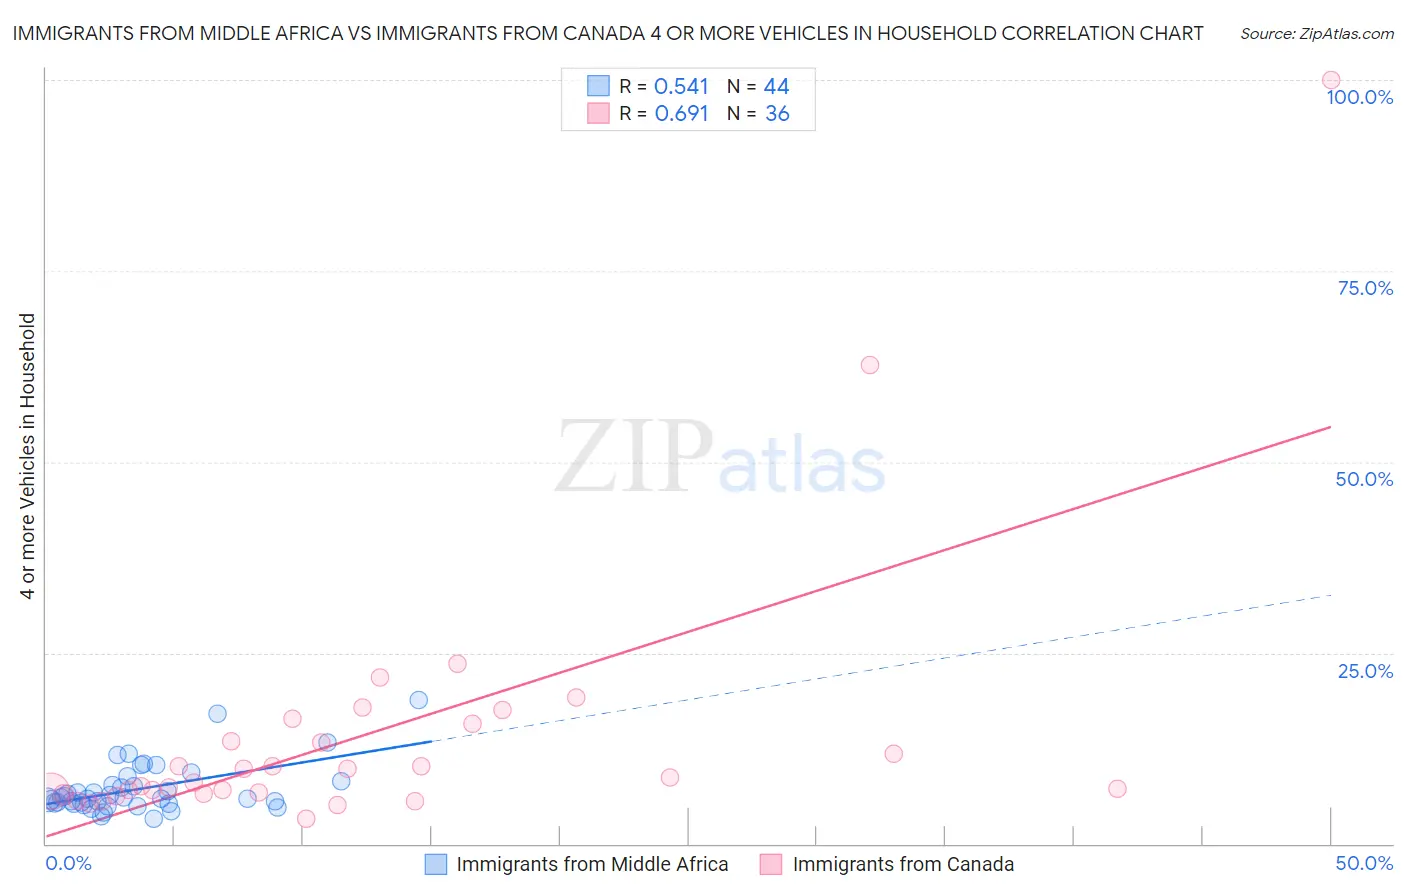 Immigrants from Middle Africa vs Immigrants from Canada 4 or more Vehicles in Household